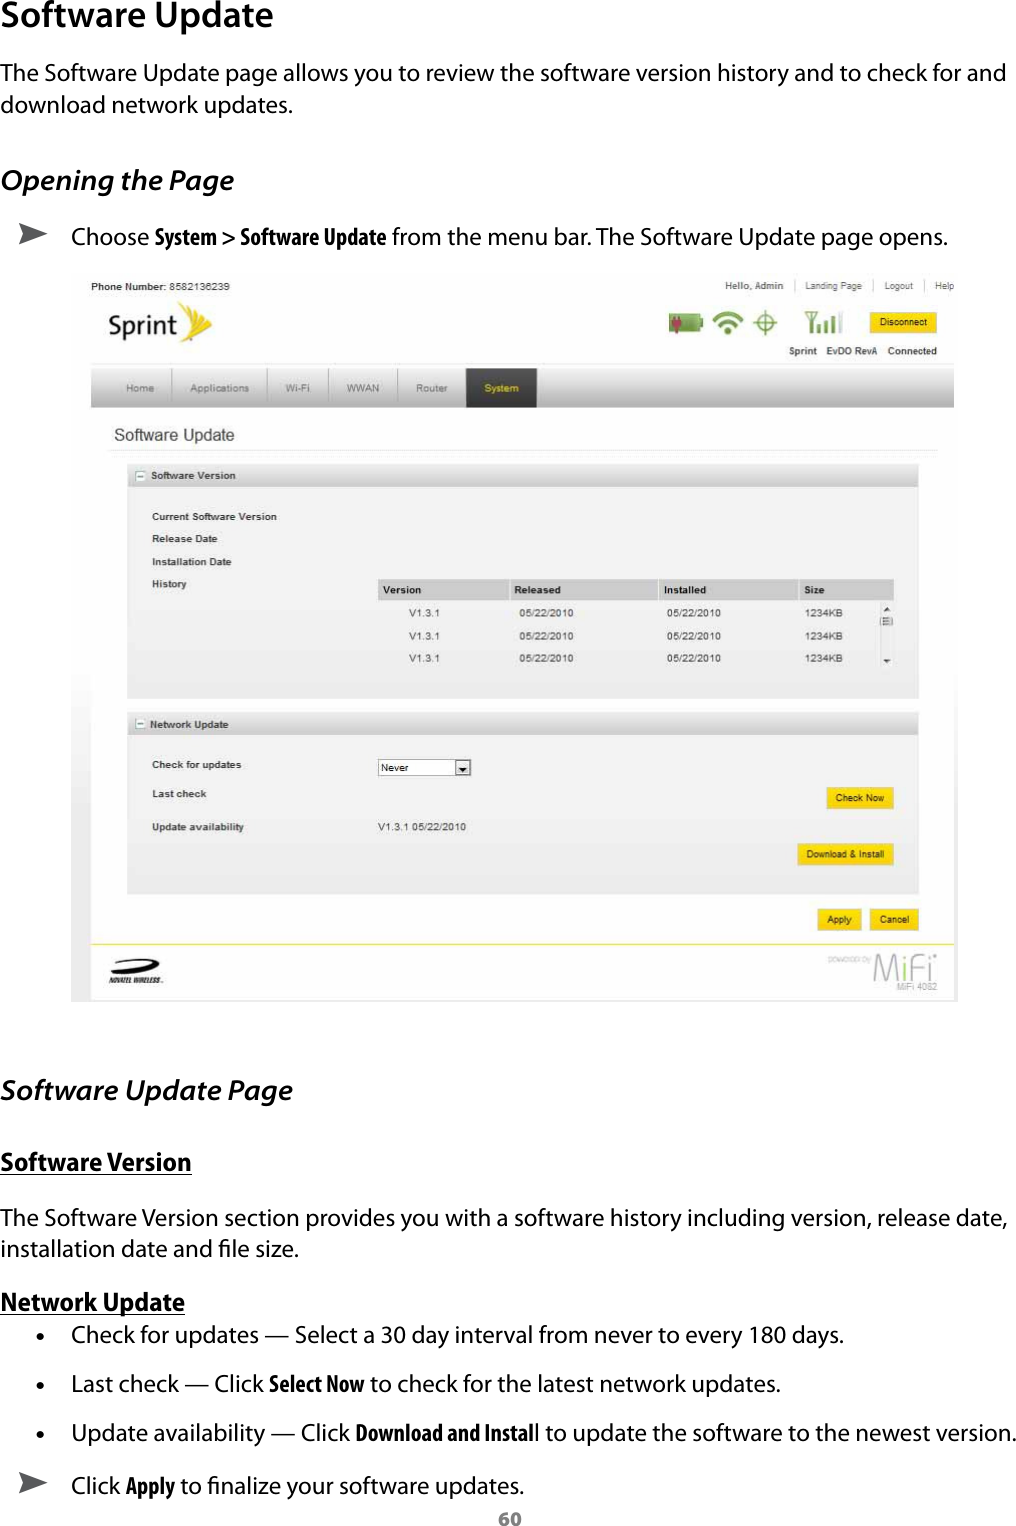 60Software UpdateThe Software Update page allows you to review the software version history and to check for and download network updates.Opening the Page ➤ Choose System &gt; Software Update from the menu bar. The Software Update page opens.Software Update PageSoftware VersionThe Software Version section provides you with a software history including version, release date, installation date and le size.Network Update •Check for updates — Select a 30 day interval from never to every 180 days.   •Last check — Click Select Now to check for the latest network updates. •Update availability — Click Download and Install to update the software to the newest version. ➤ Click Apply to nalize your software updates.